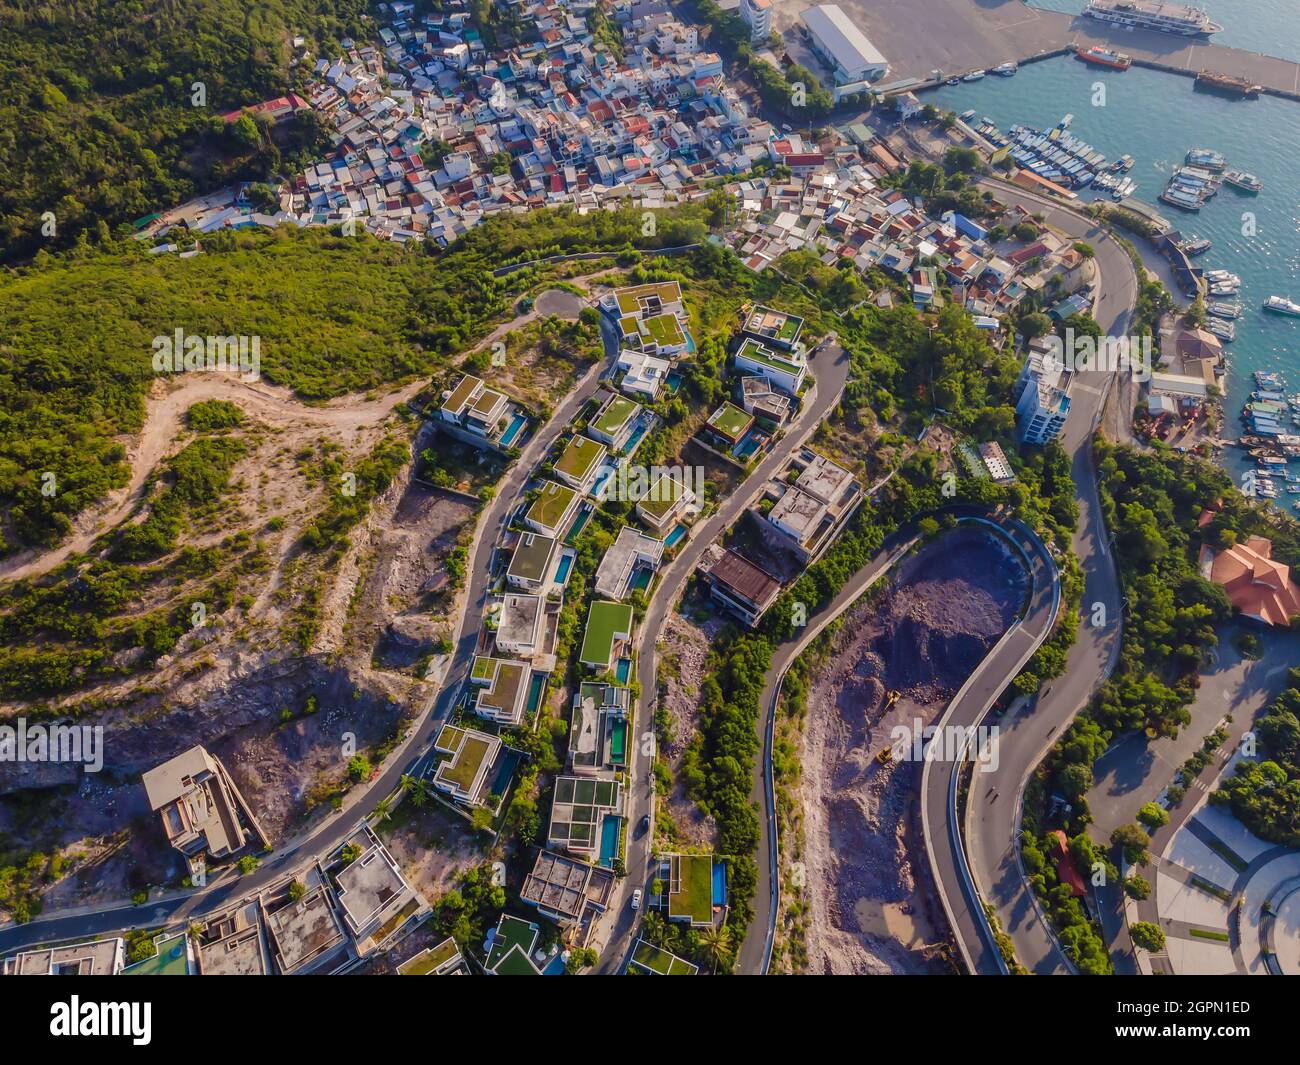 Drone view of Nha Trang city and An Vien village, Vietnam Stock Photo